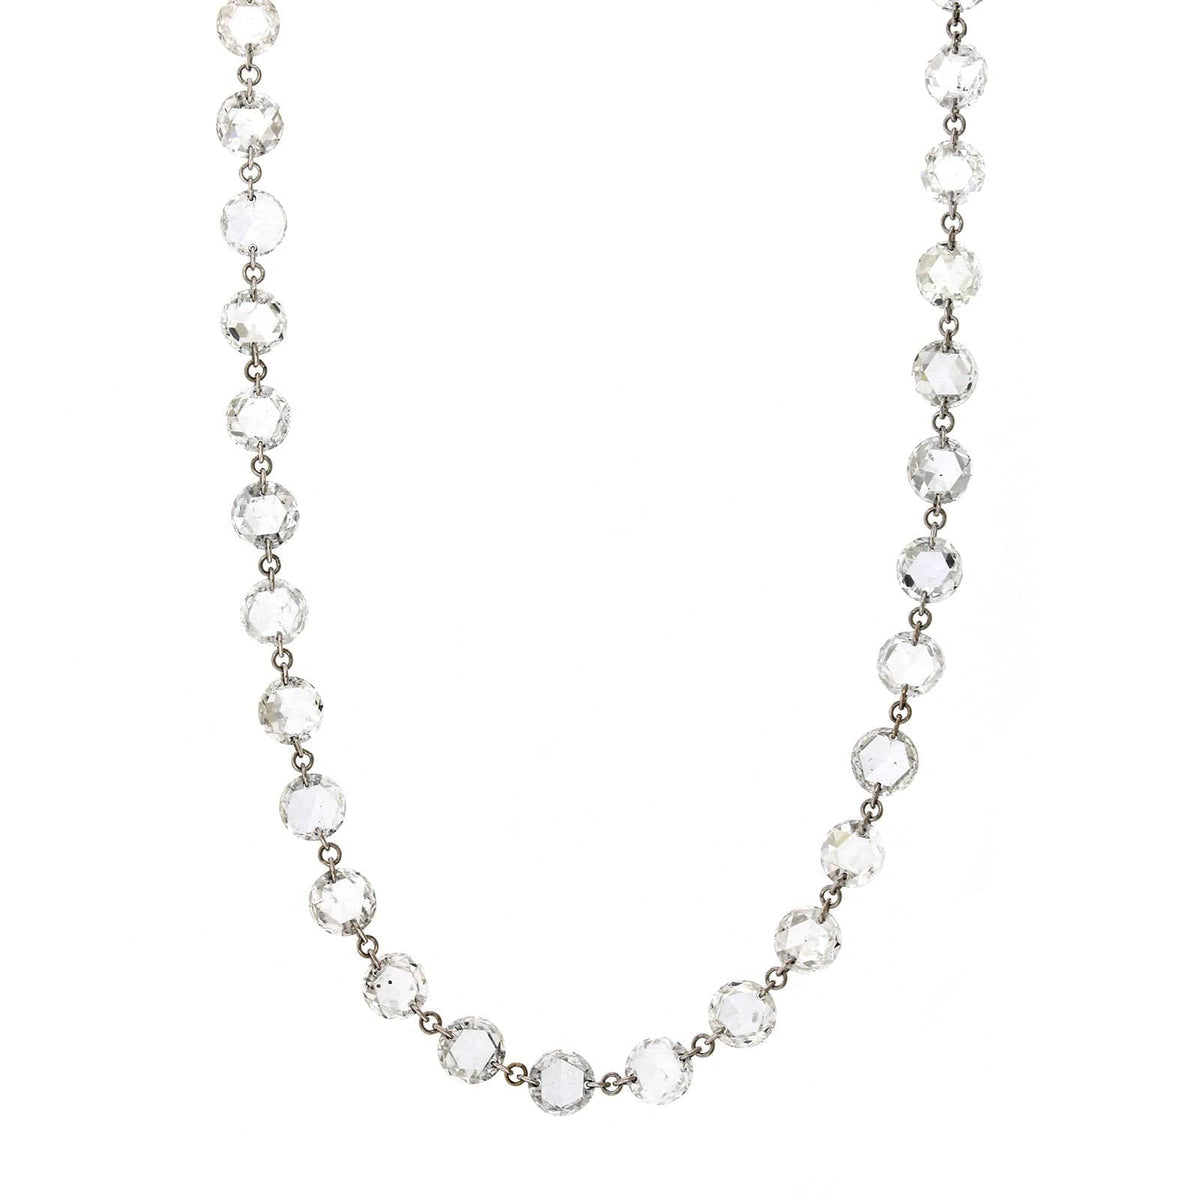 18K White Gold Rose Cut Diamond Bead Necklace, White Gold, Long's Jewelers